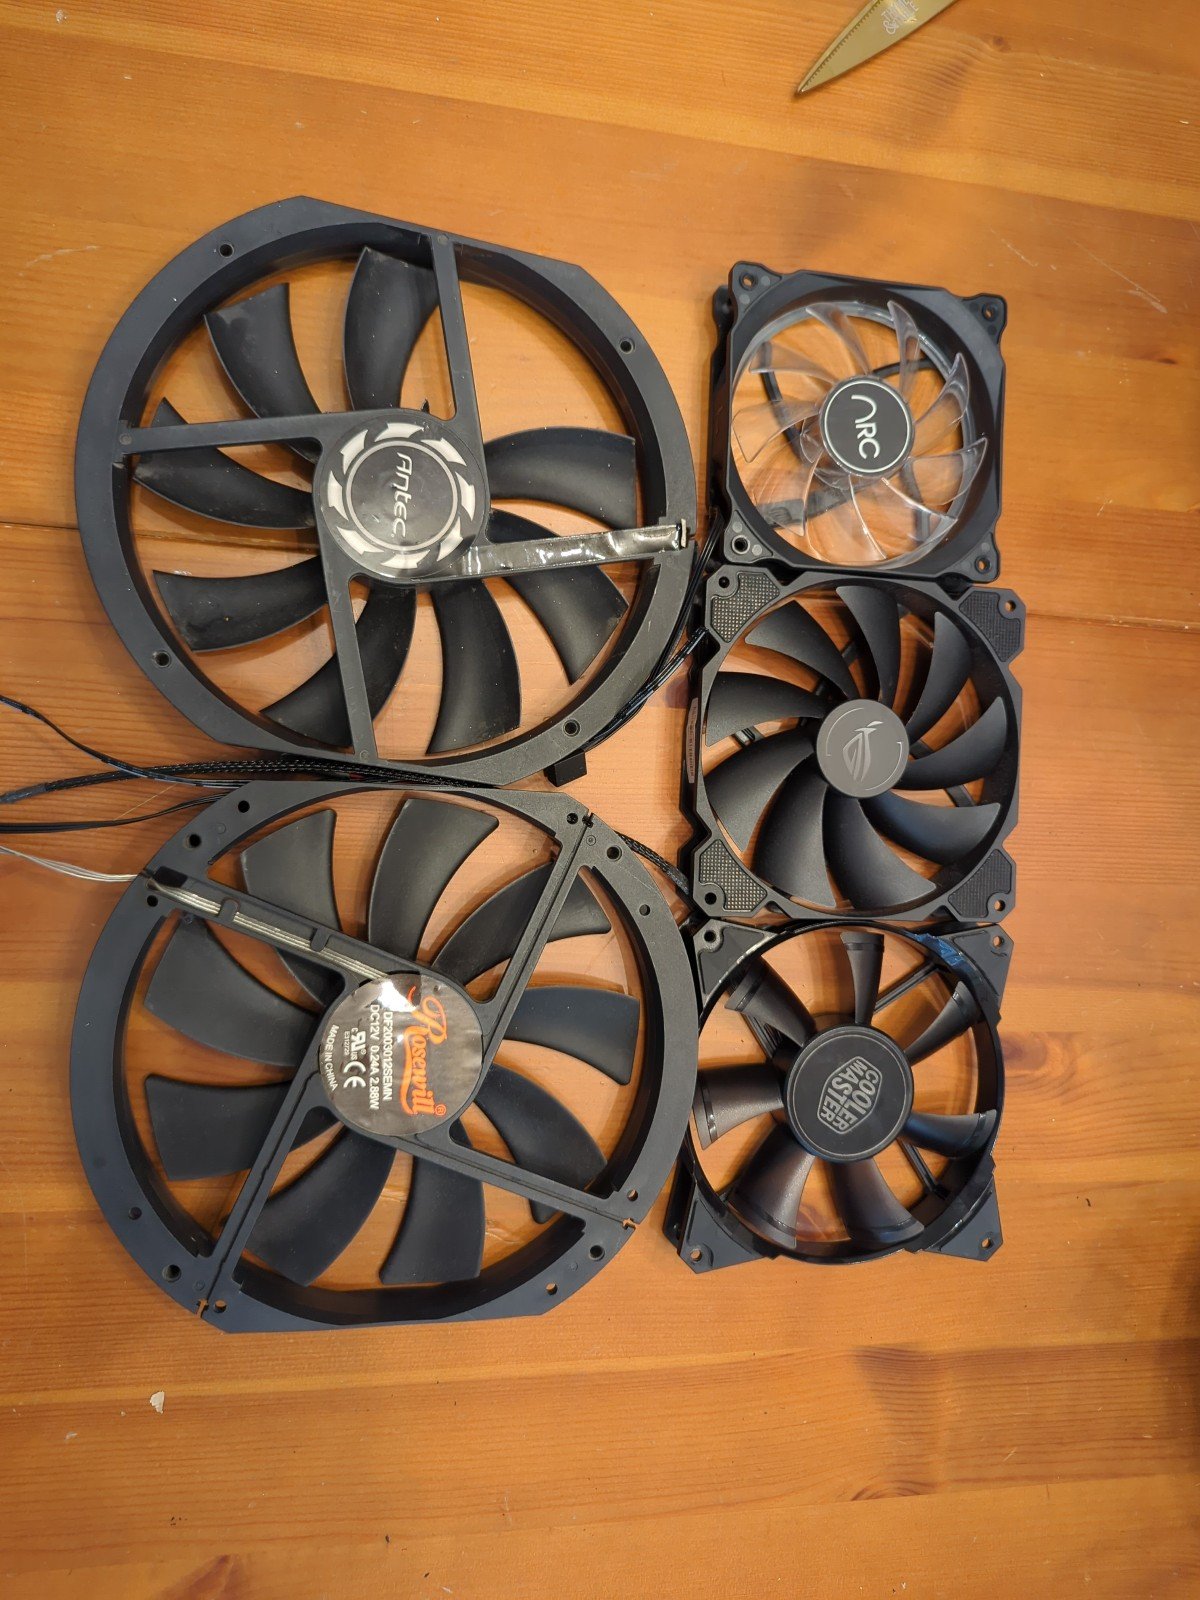 Mix Fans 120 140 and 200mm gF9tYxnnN